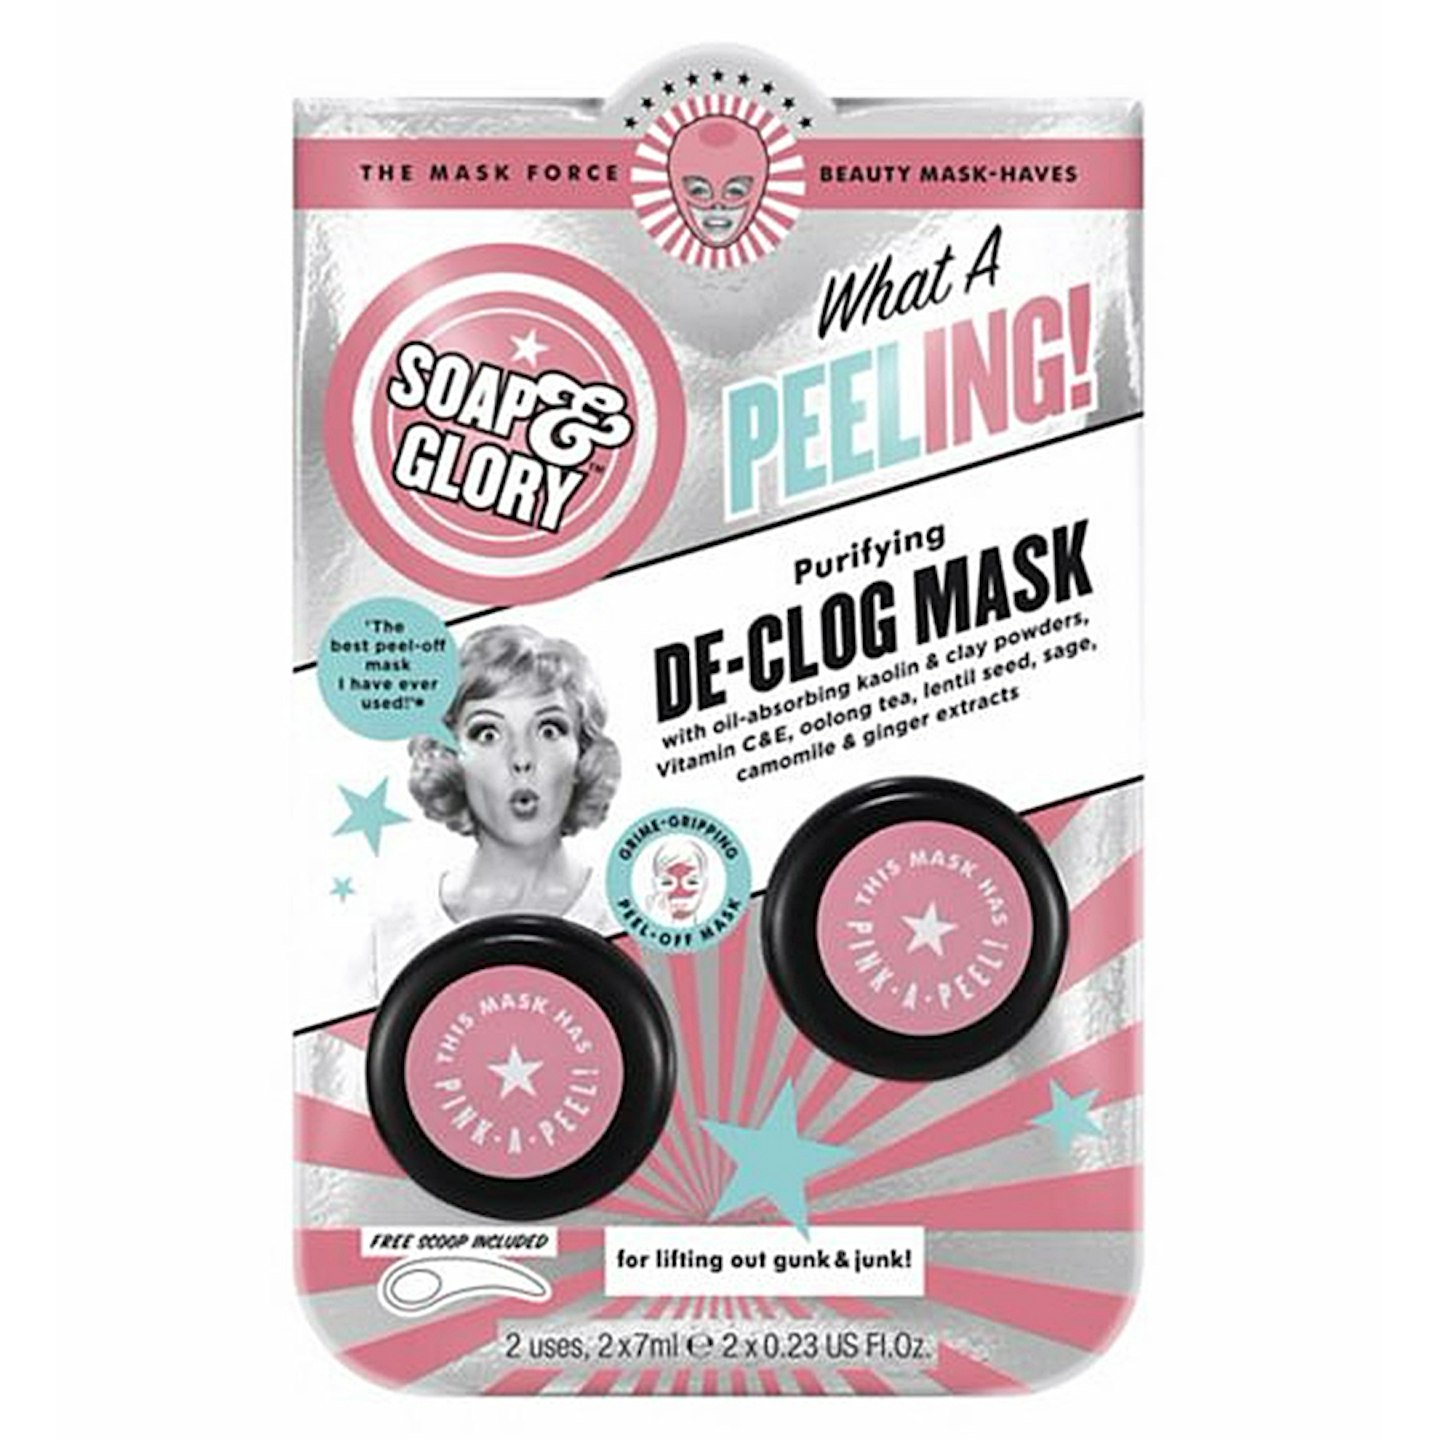 Soap and Glory, peel-off face masks